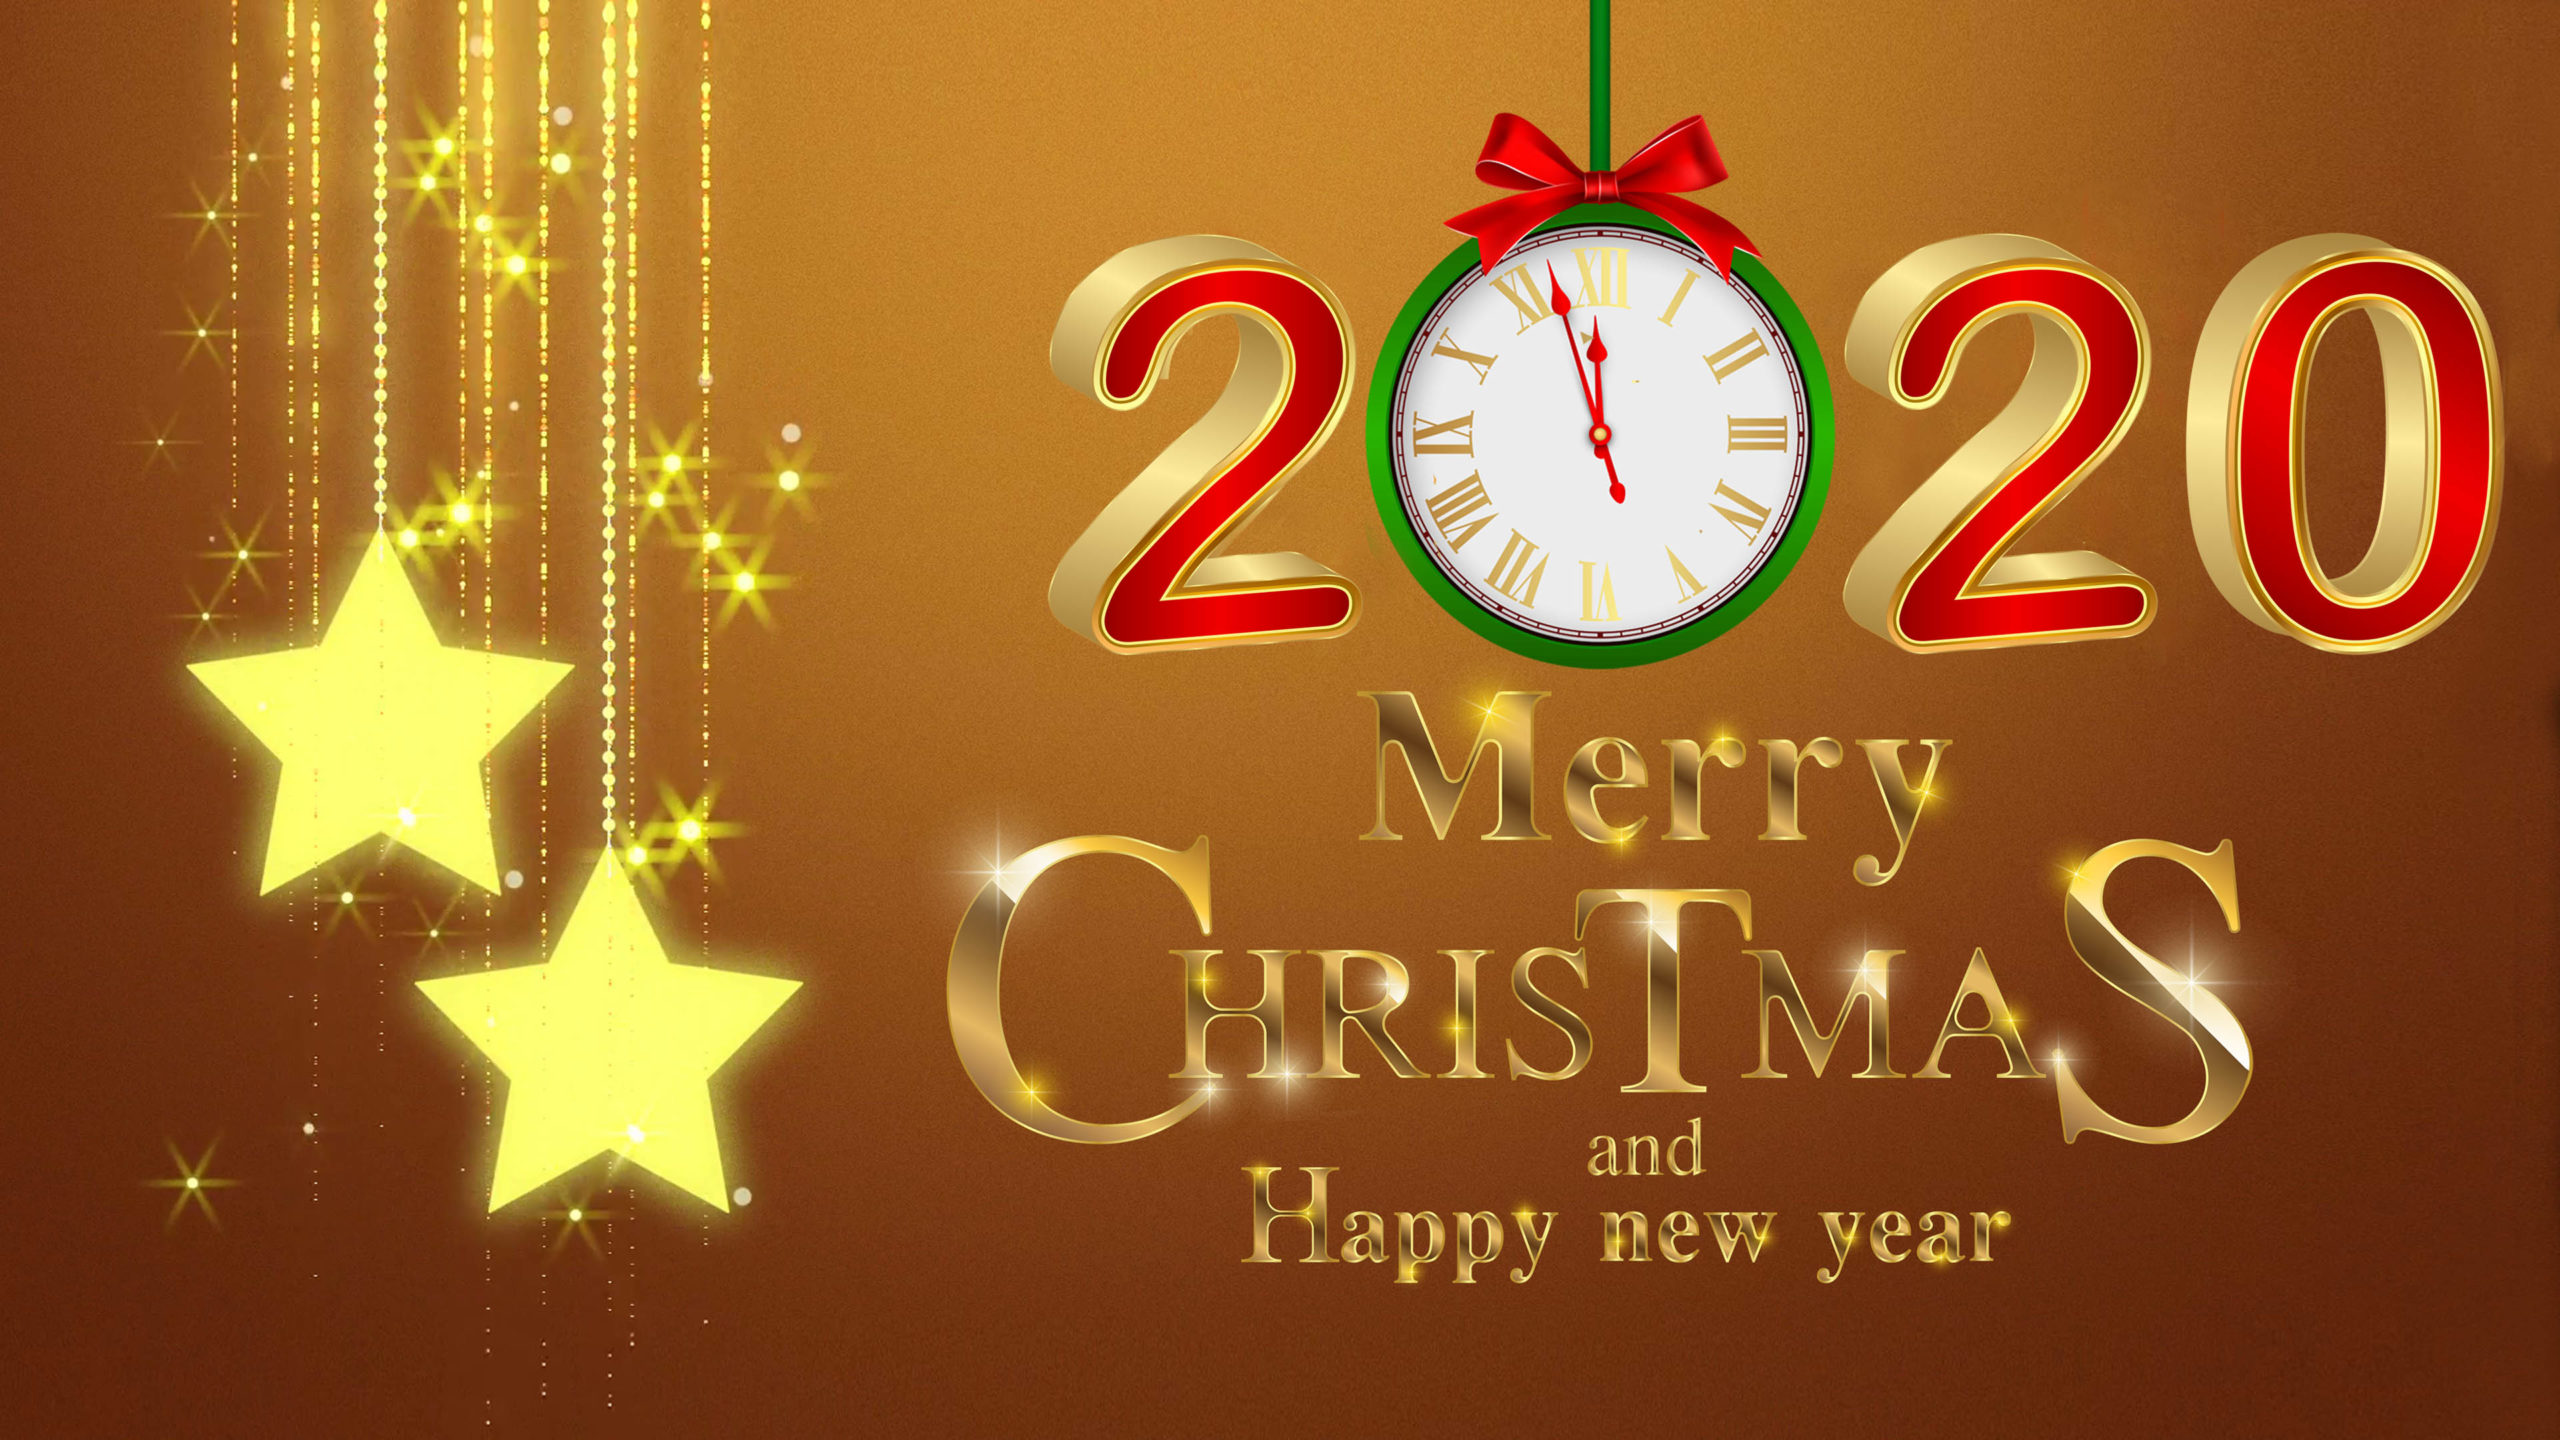 Christmas 2020 Images | Free Vectors